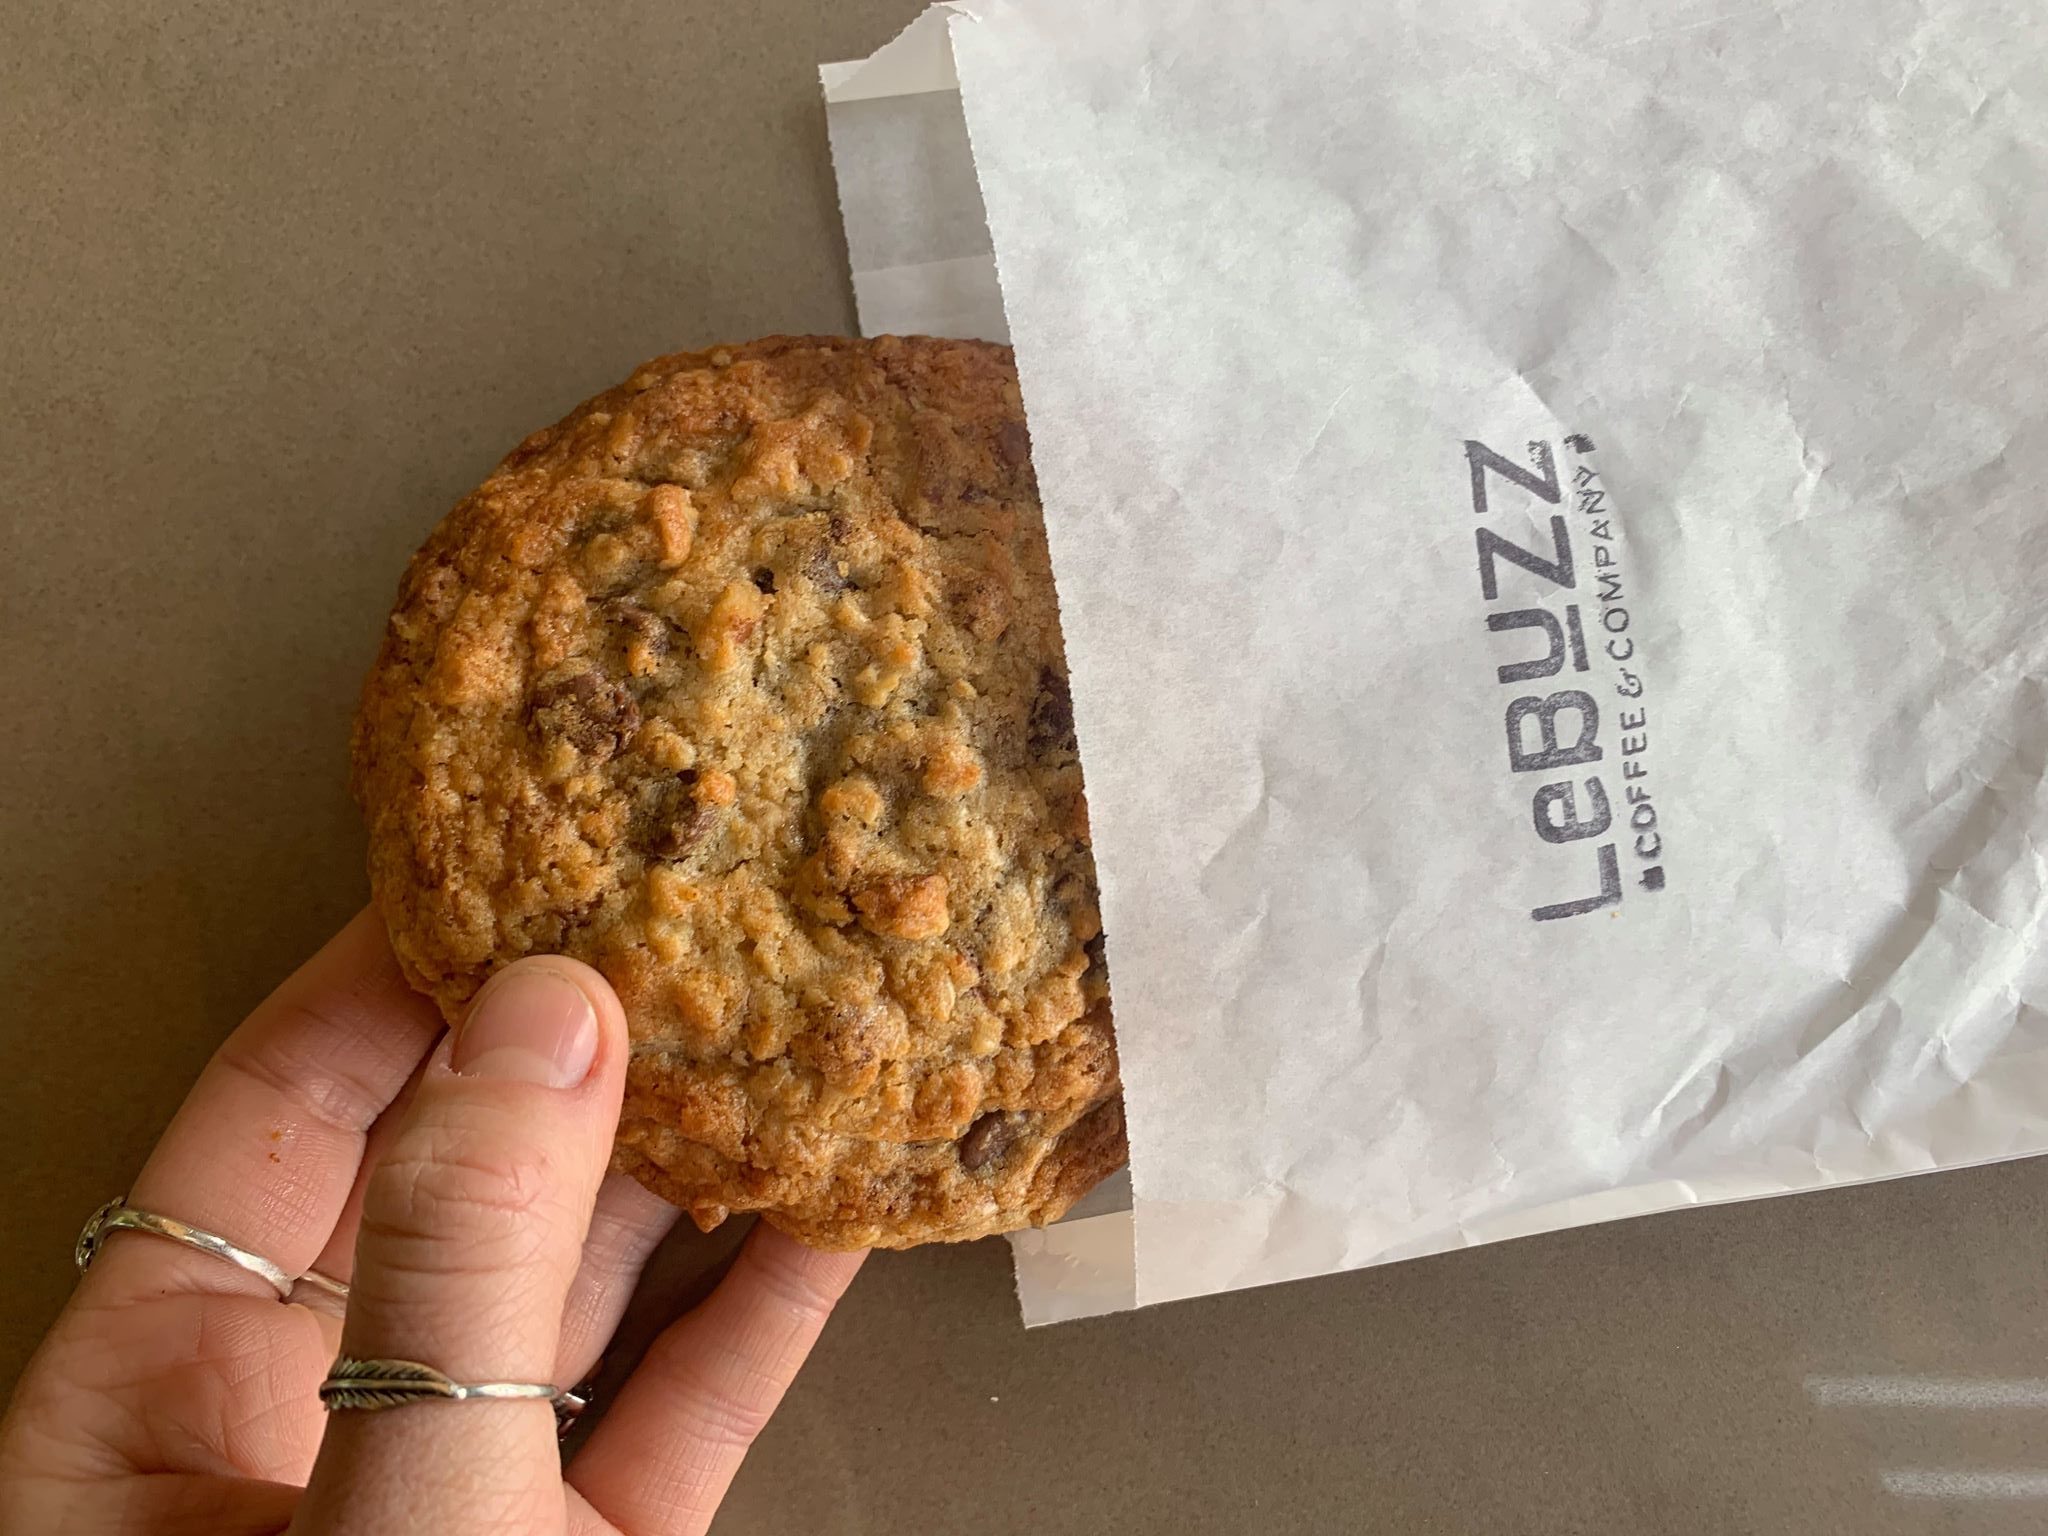 Le Buzz Cookie from Le Buzz Caffe (Credit: Kate Severino)